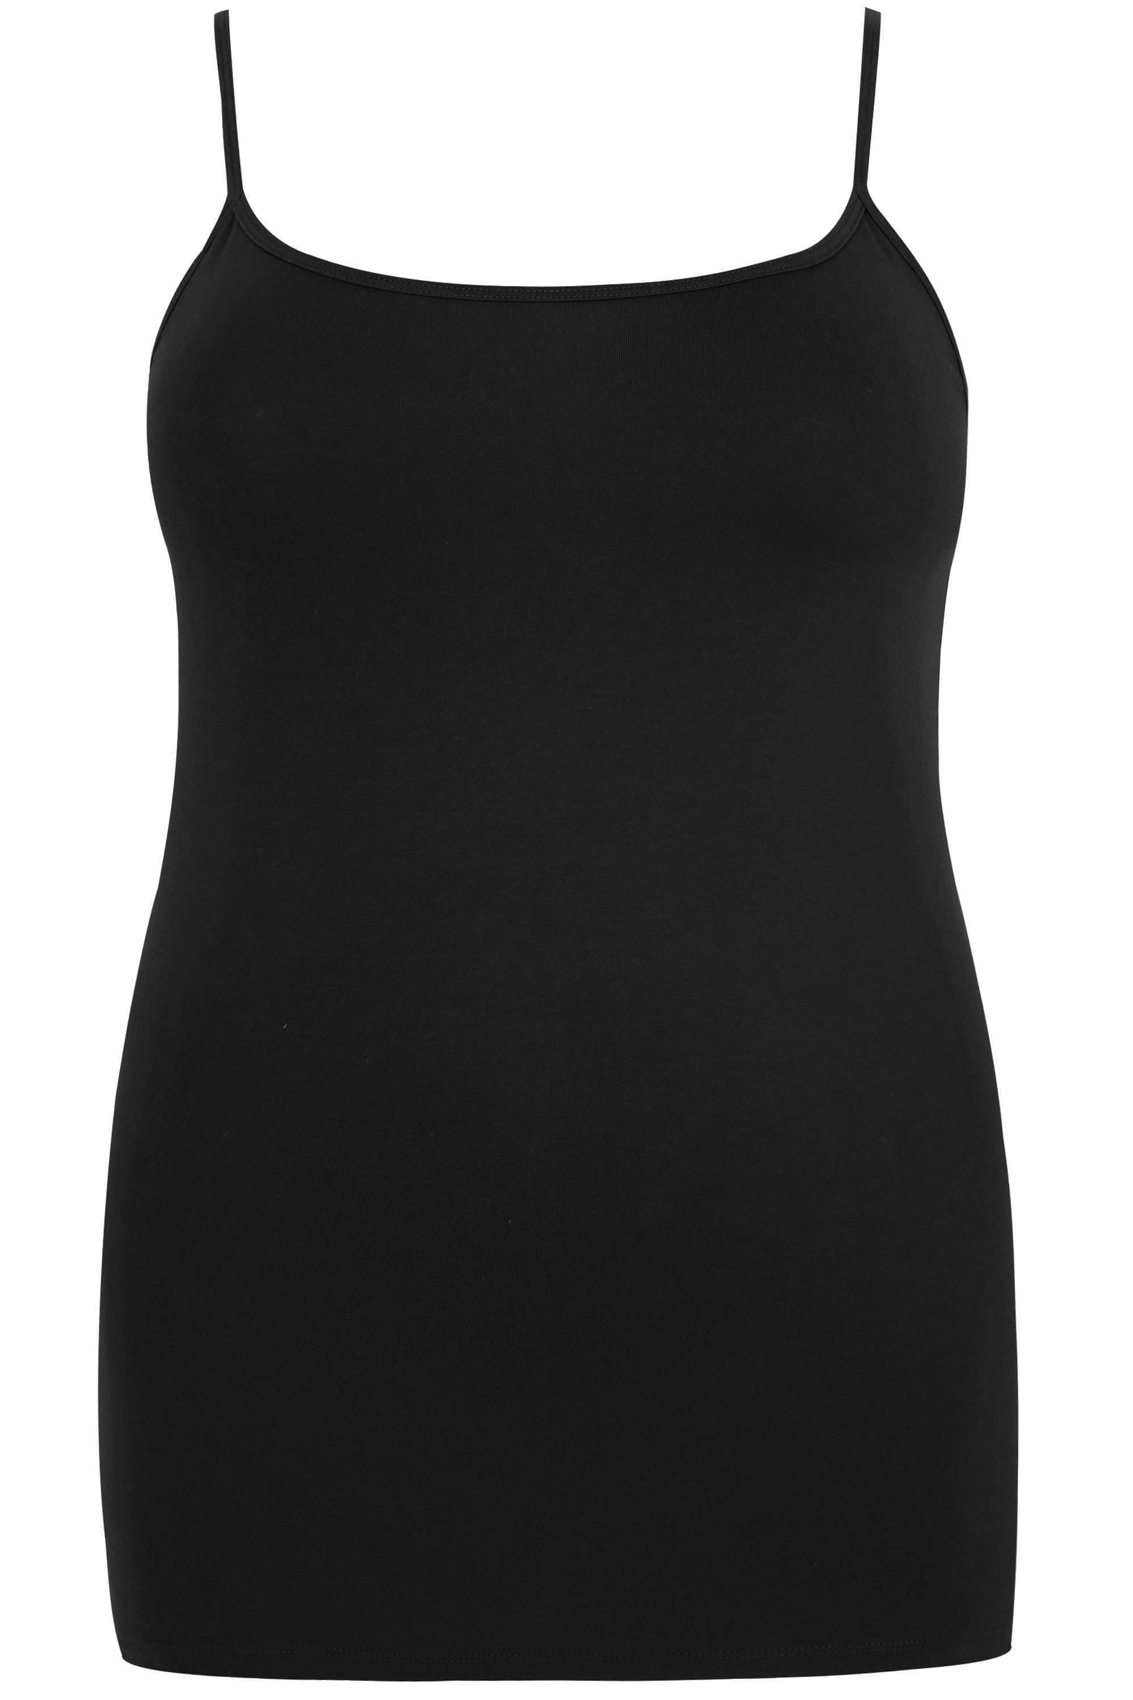 Plus Size Black Vest Top | Sizes 16 to 36 | Yours Clothing